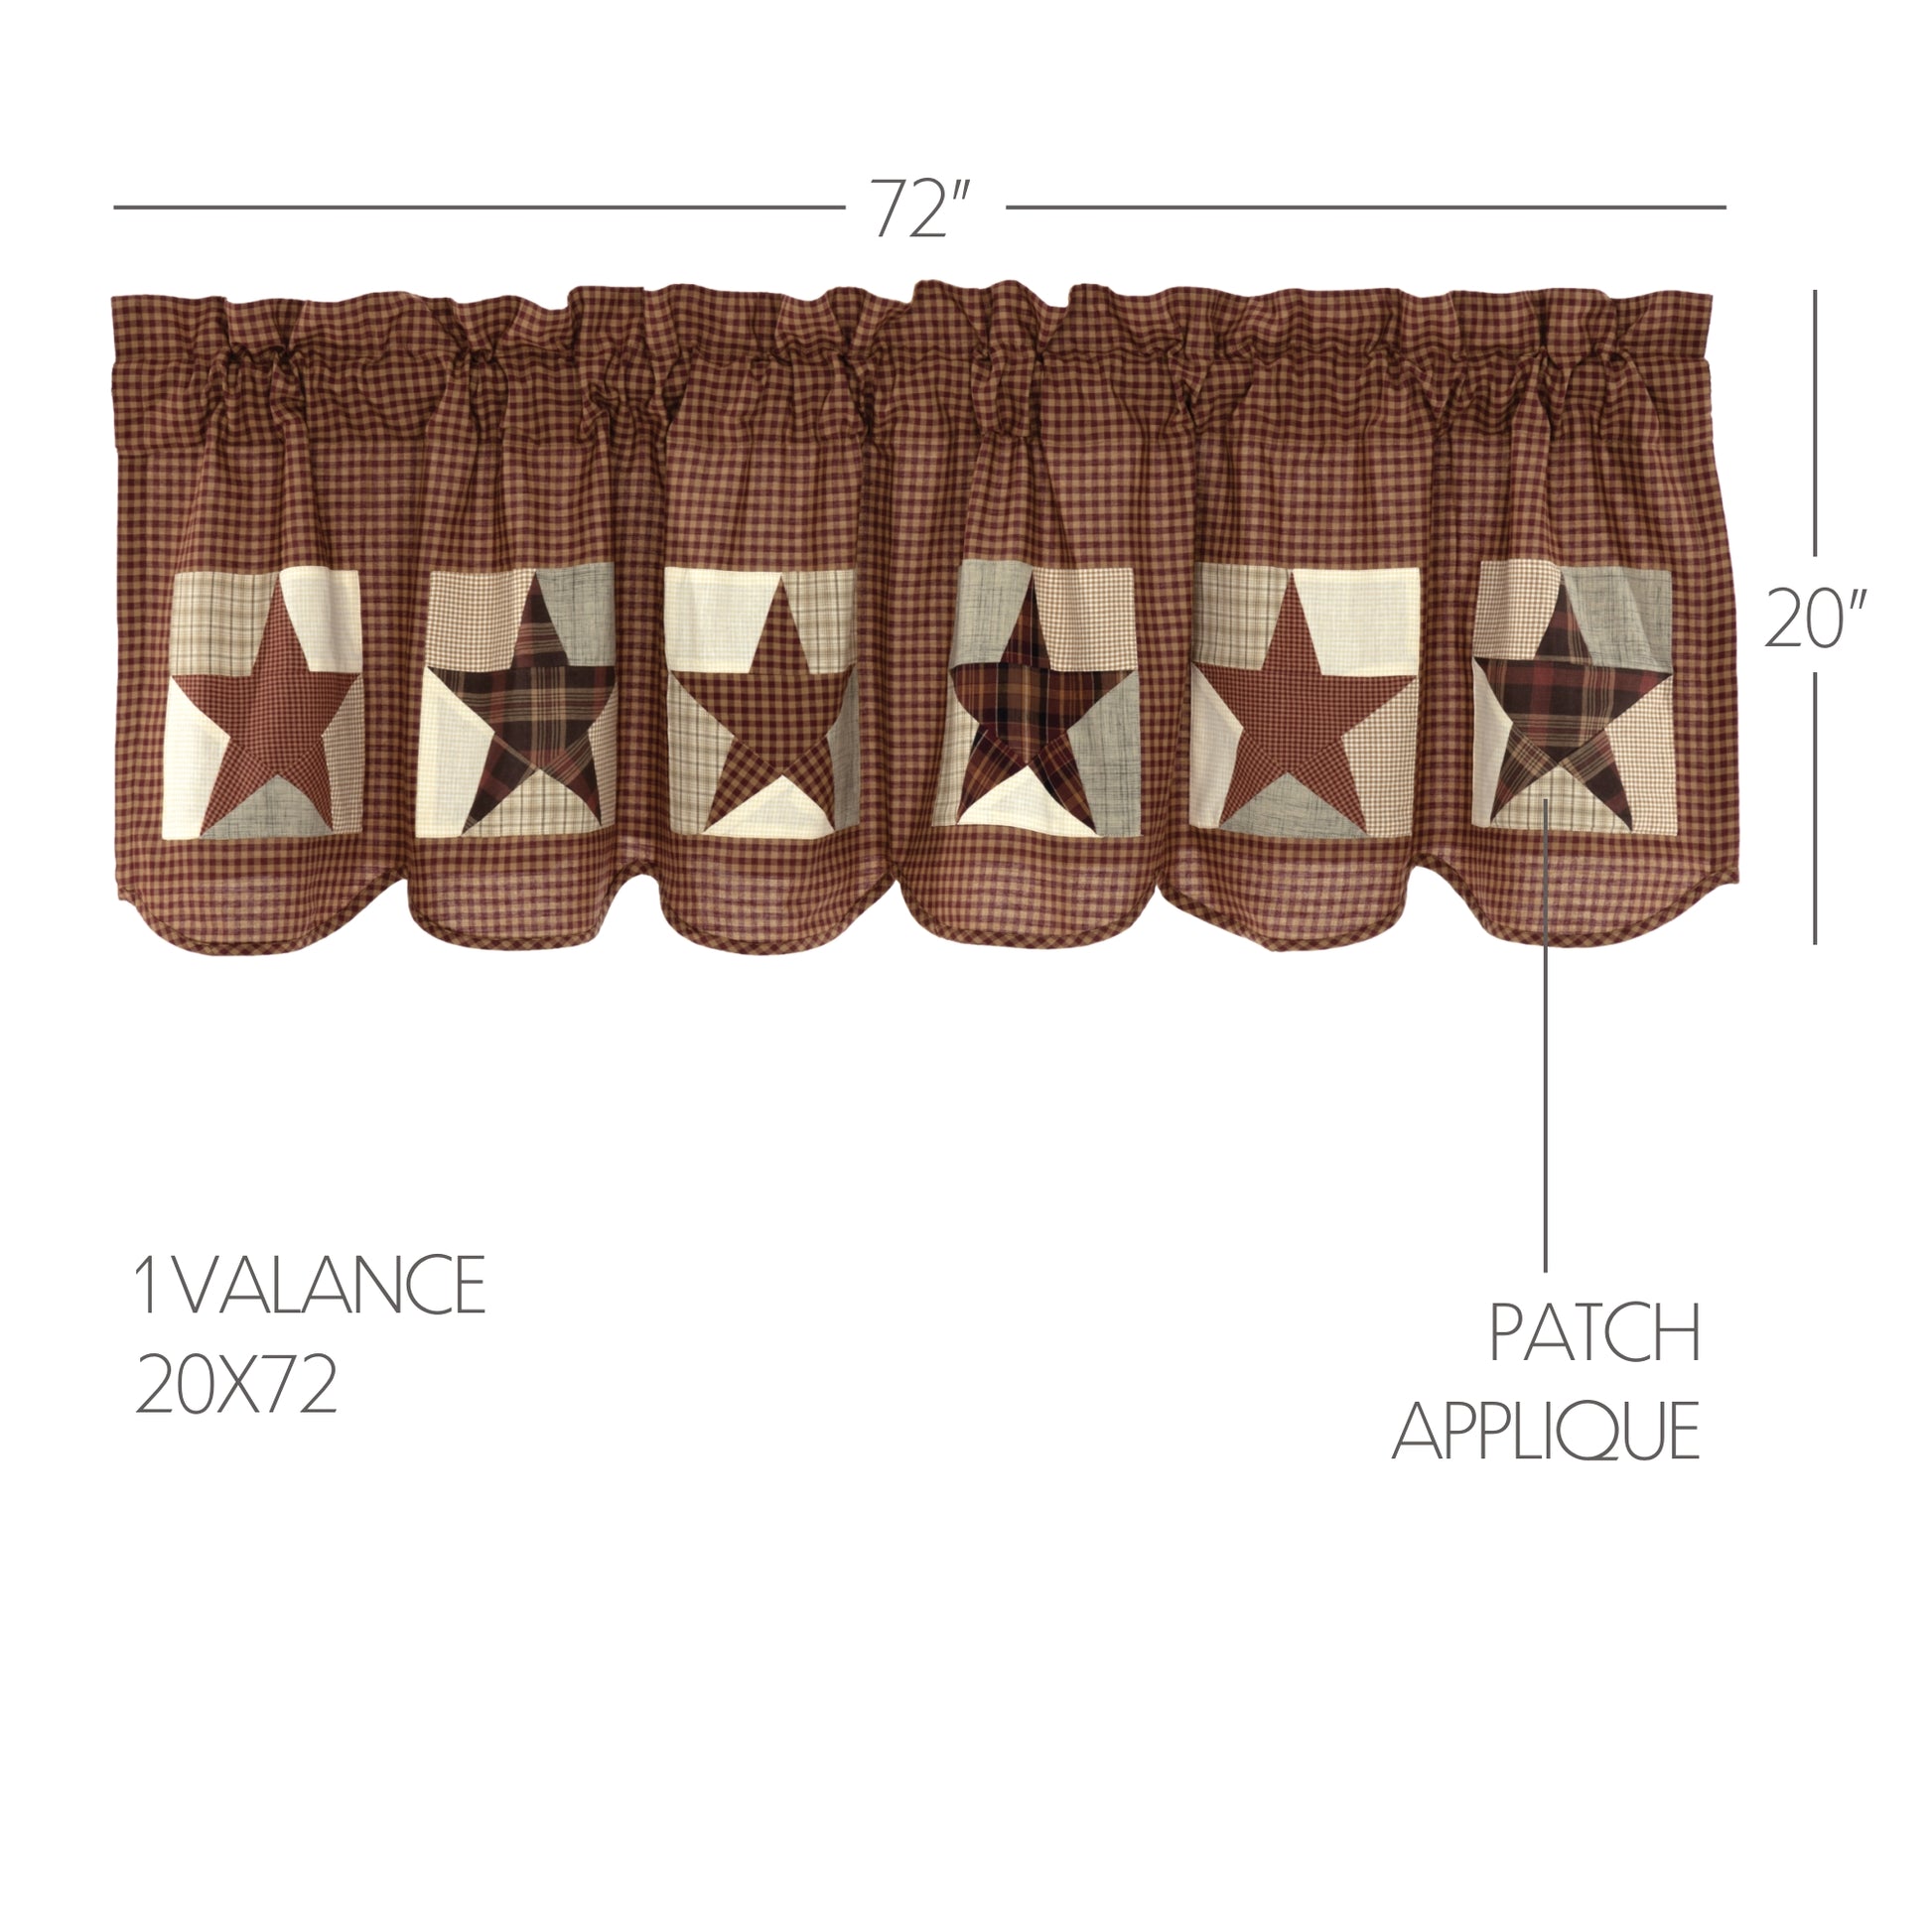 50807-Abilene-Patch-Block-and-Star-Valance-20x72-image-1